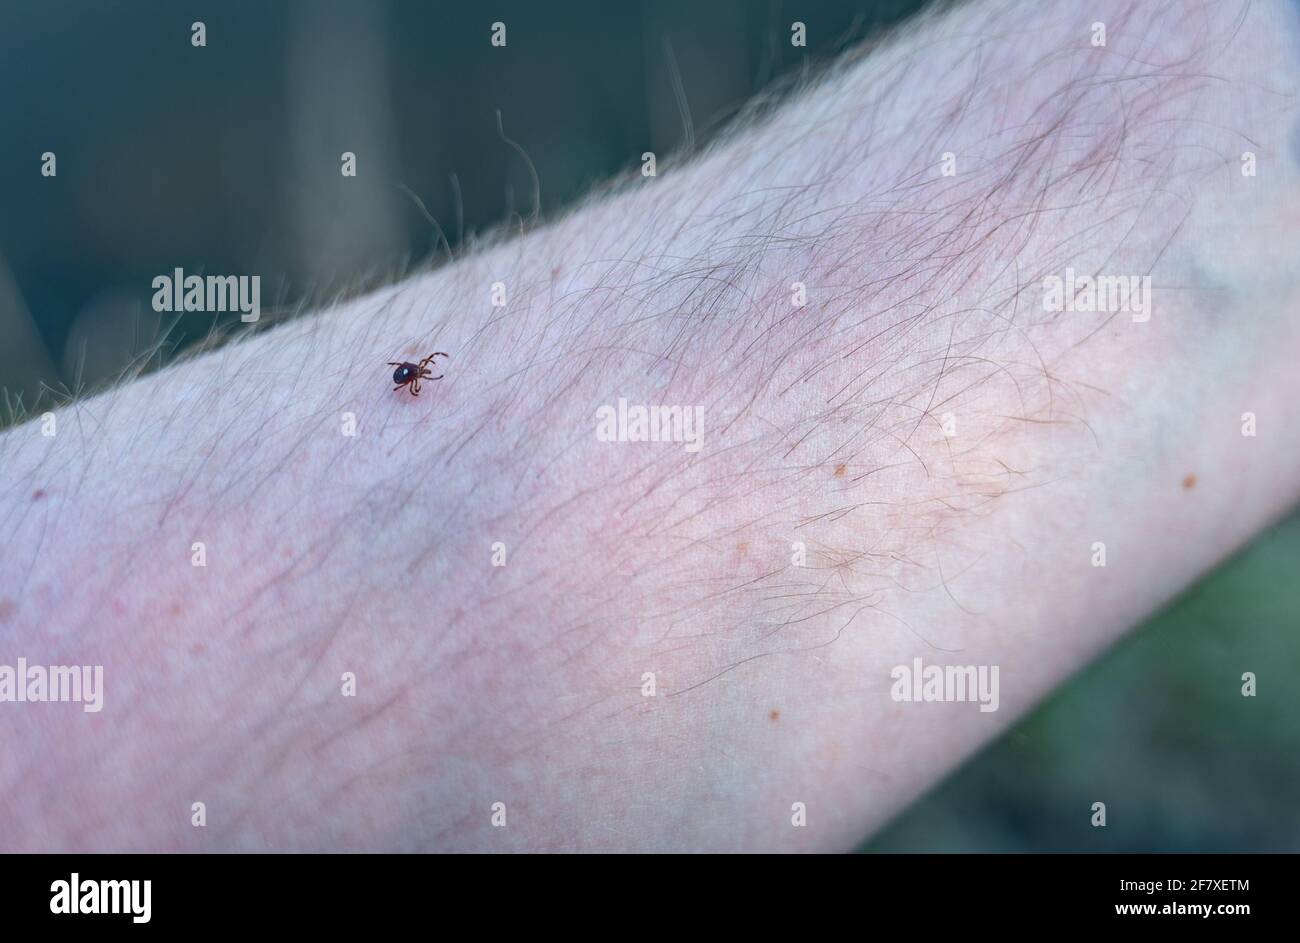 A lone star tick, a common vector of diseases, crawling on an arm Stock Photo